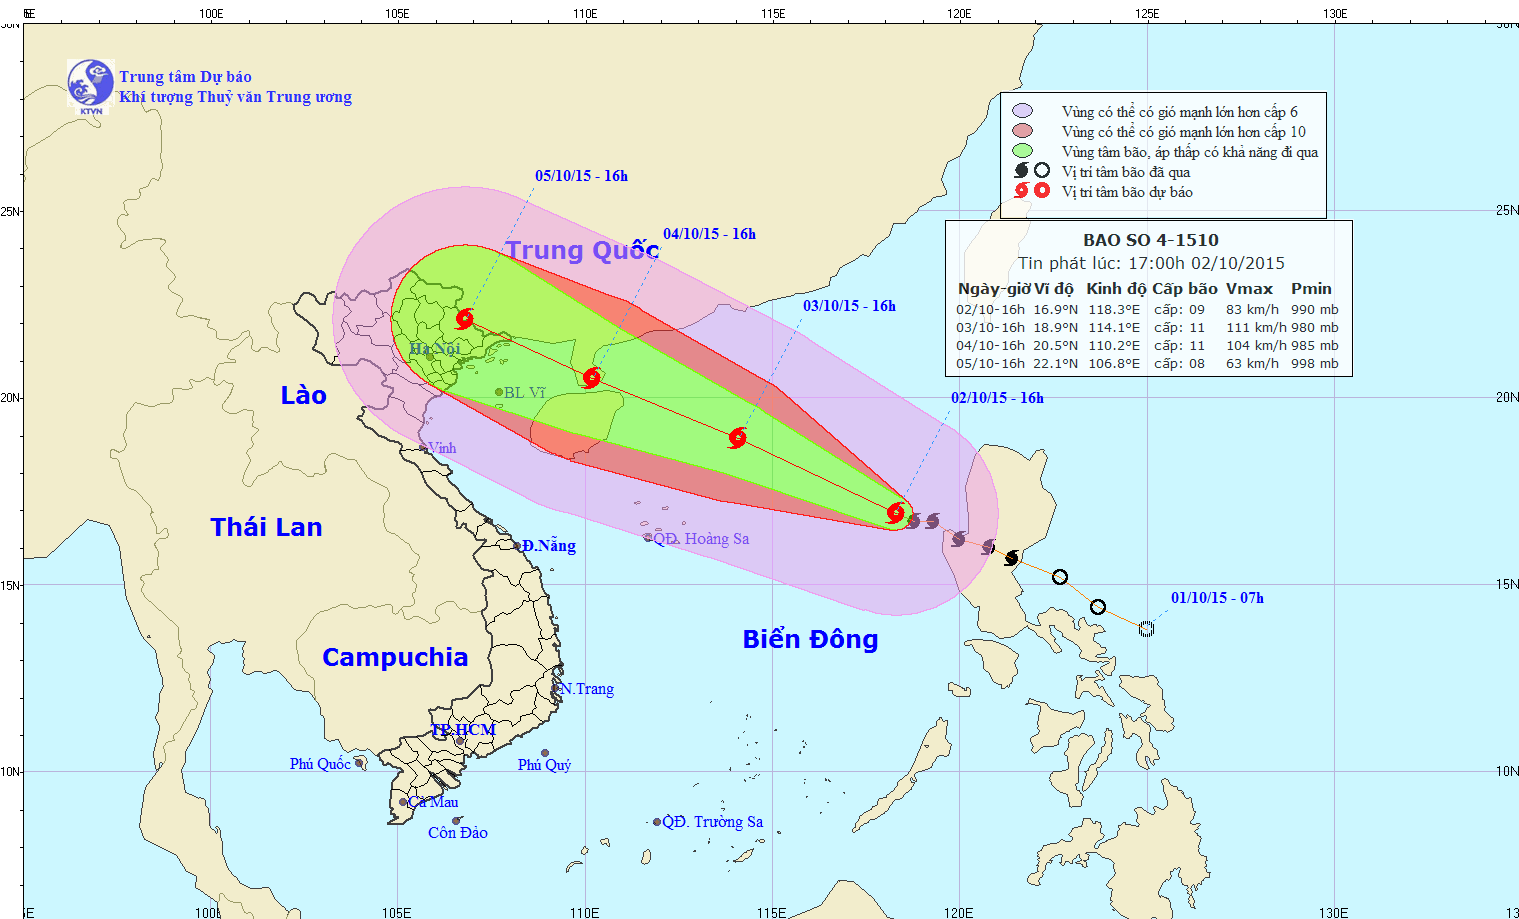 Tin bao. Dong biển. Tropical Storm ma-on Raged in the Southern Province of Guangdong, China..